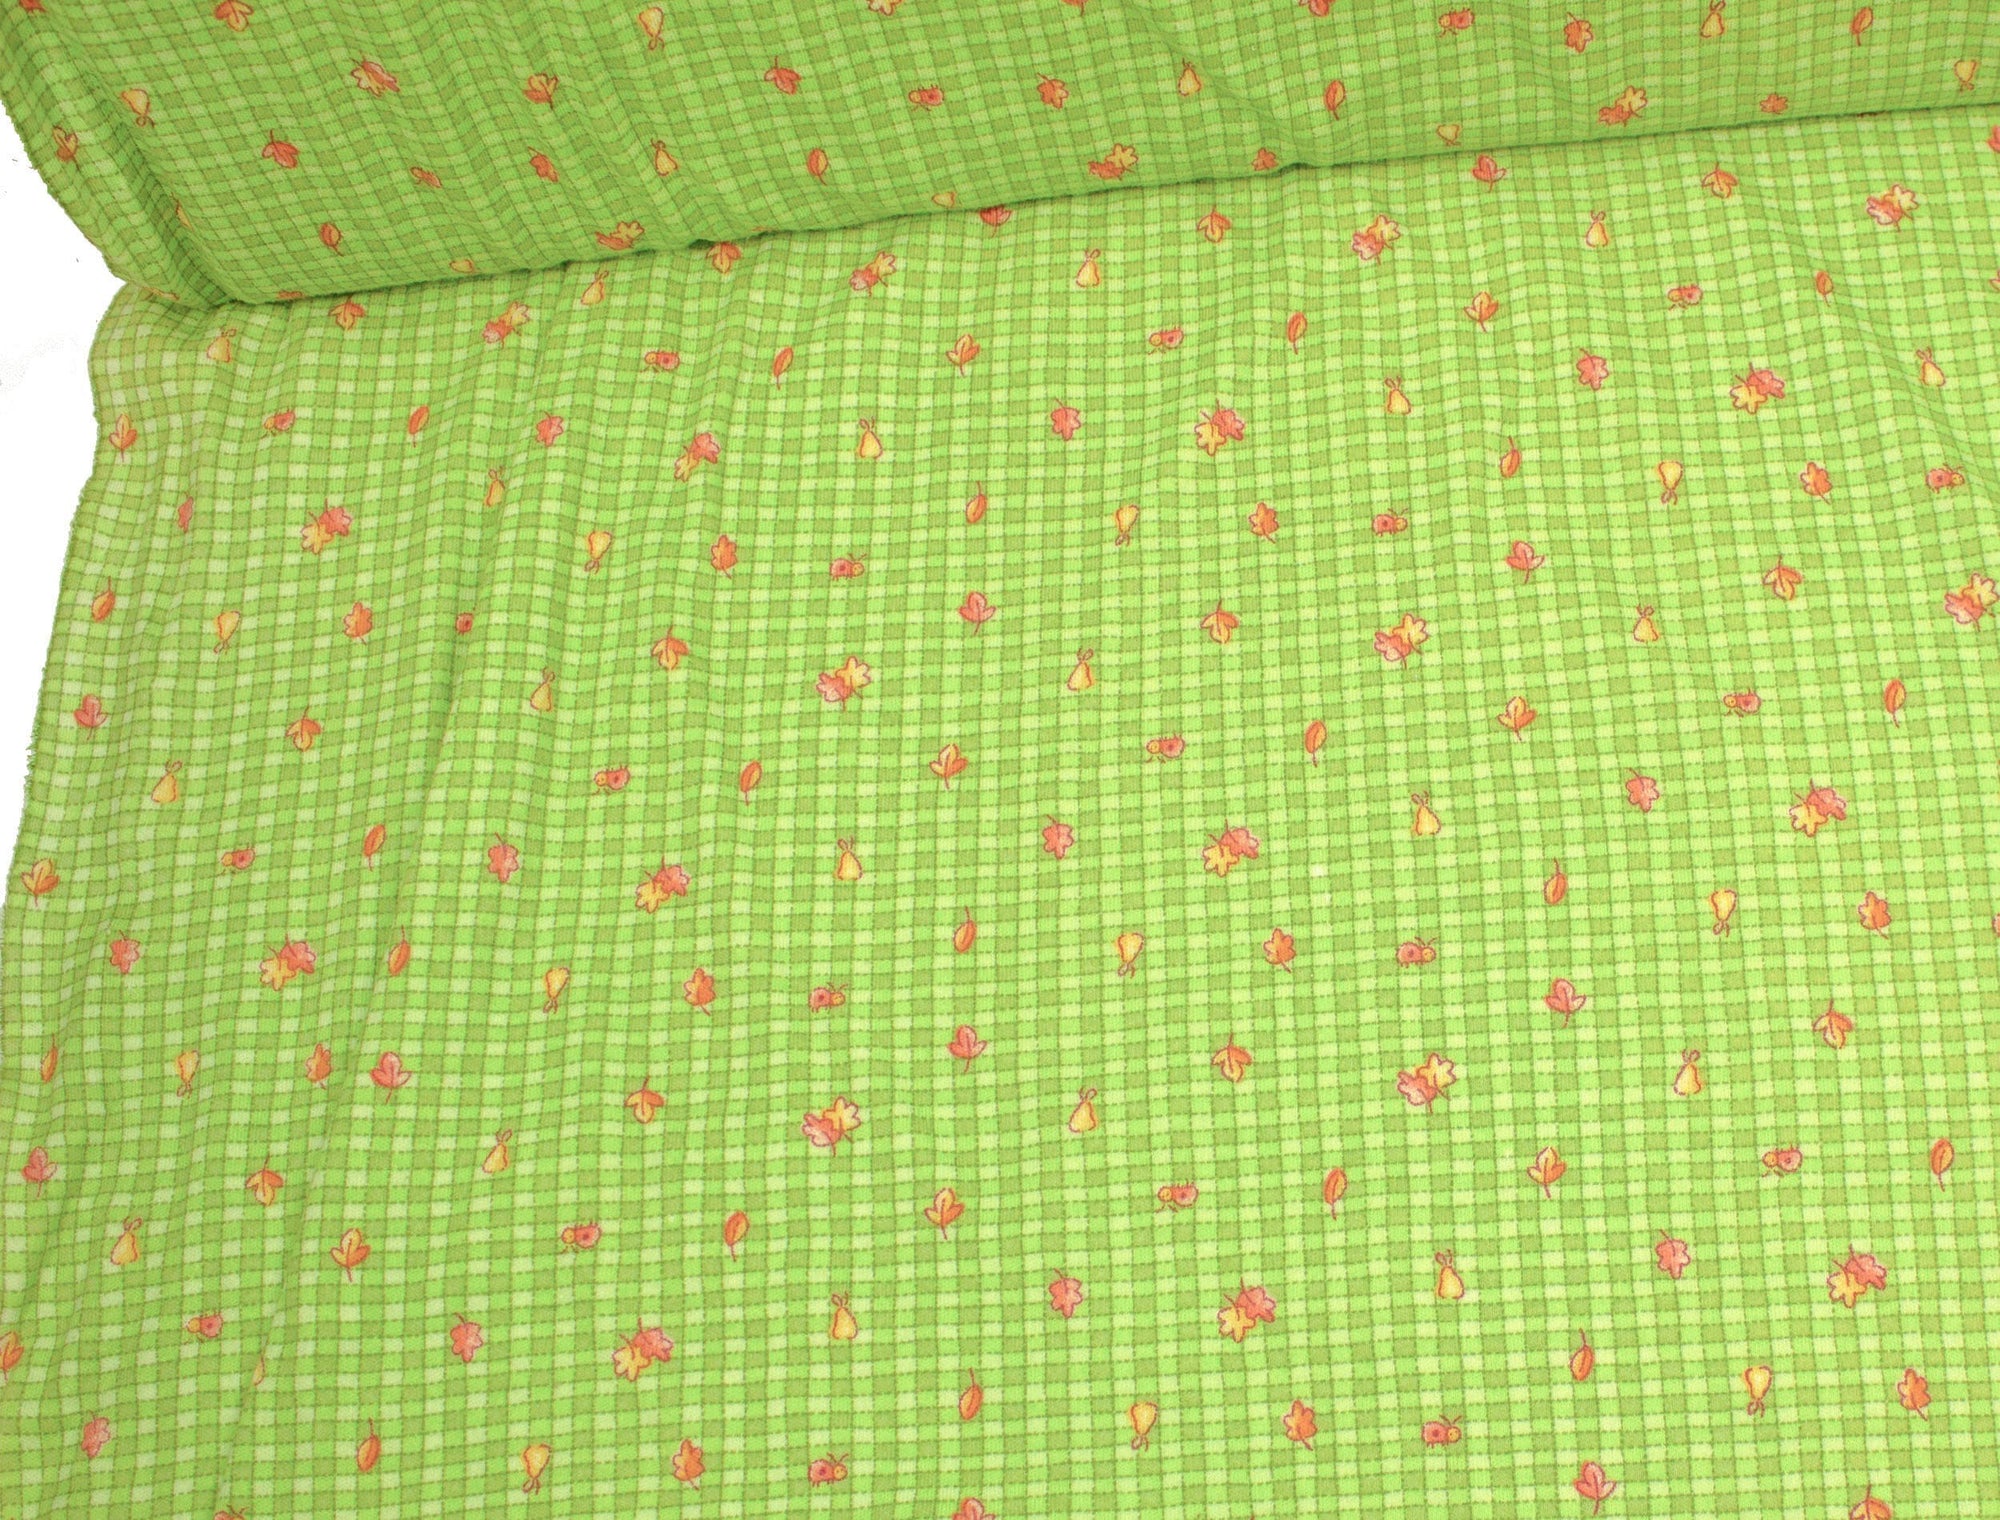 Vintage Fabric Green Gradient Check Cotton Print with Leaves and Pears 60" Wide - Sold by the Yard